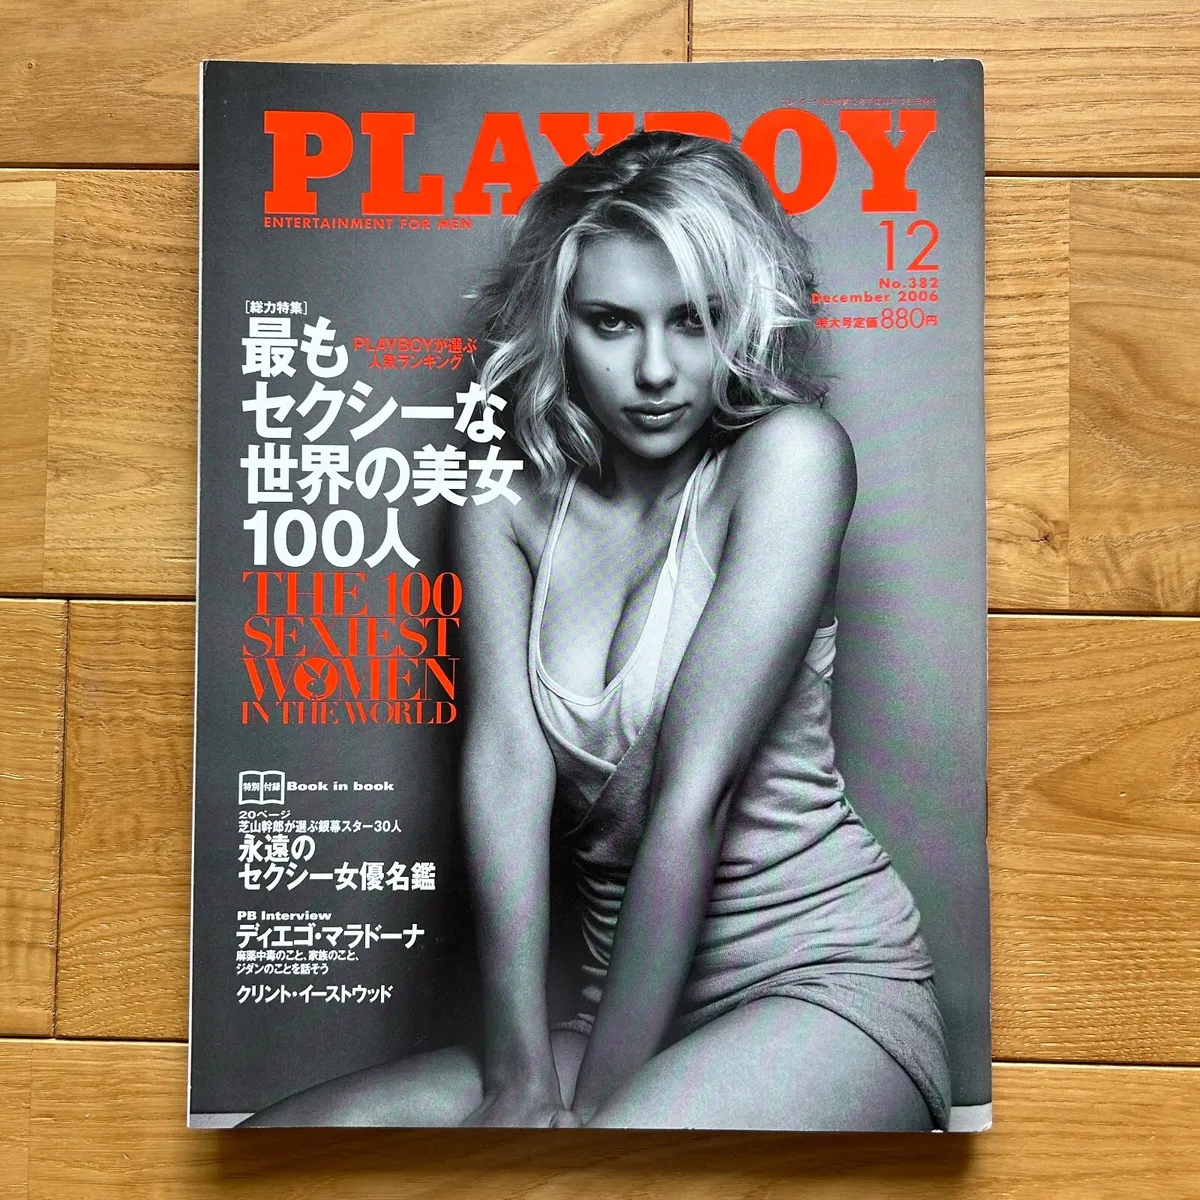 ahmad ade recommends scarlett johansson playboy pictures pic